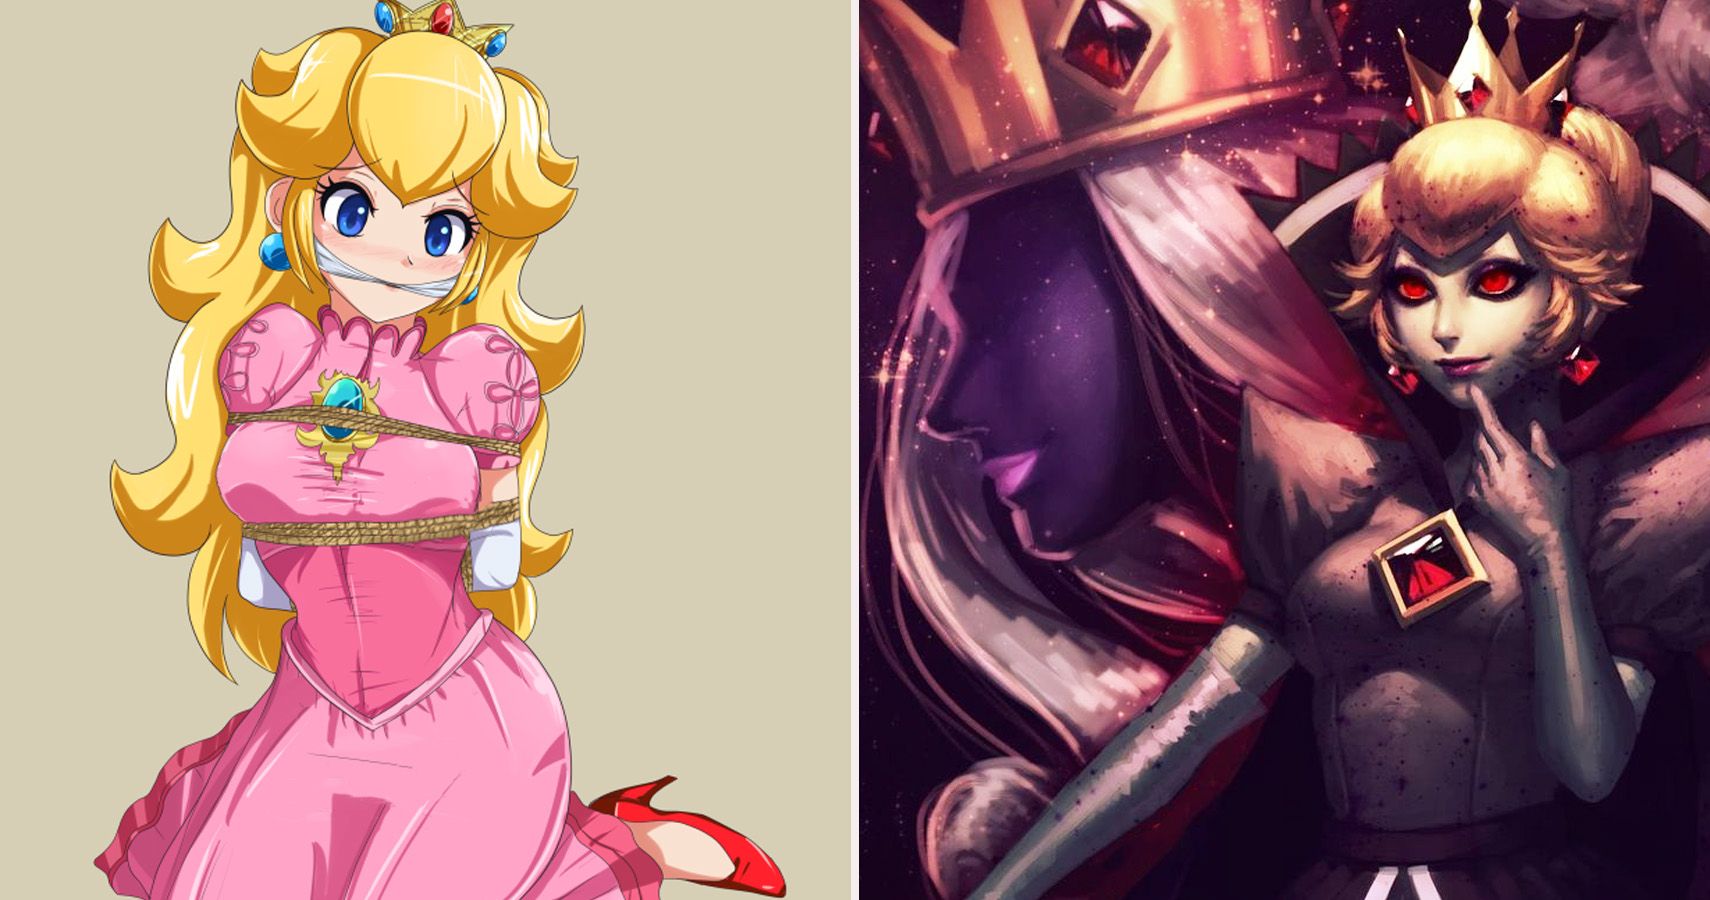 Super Mario: The Worst Things That Have Ever Happened To Princess Peach